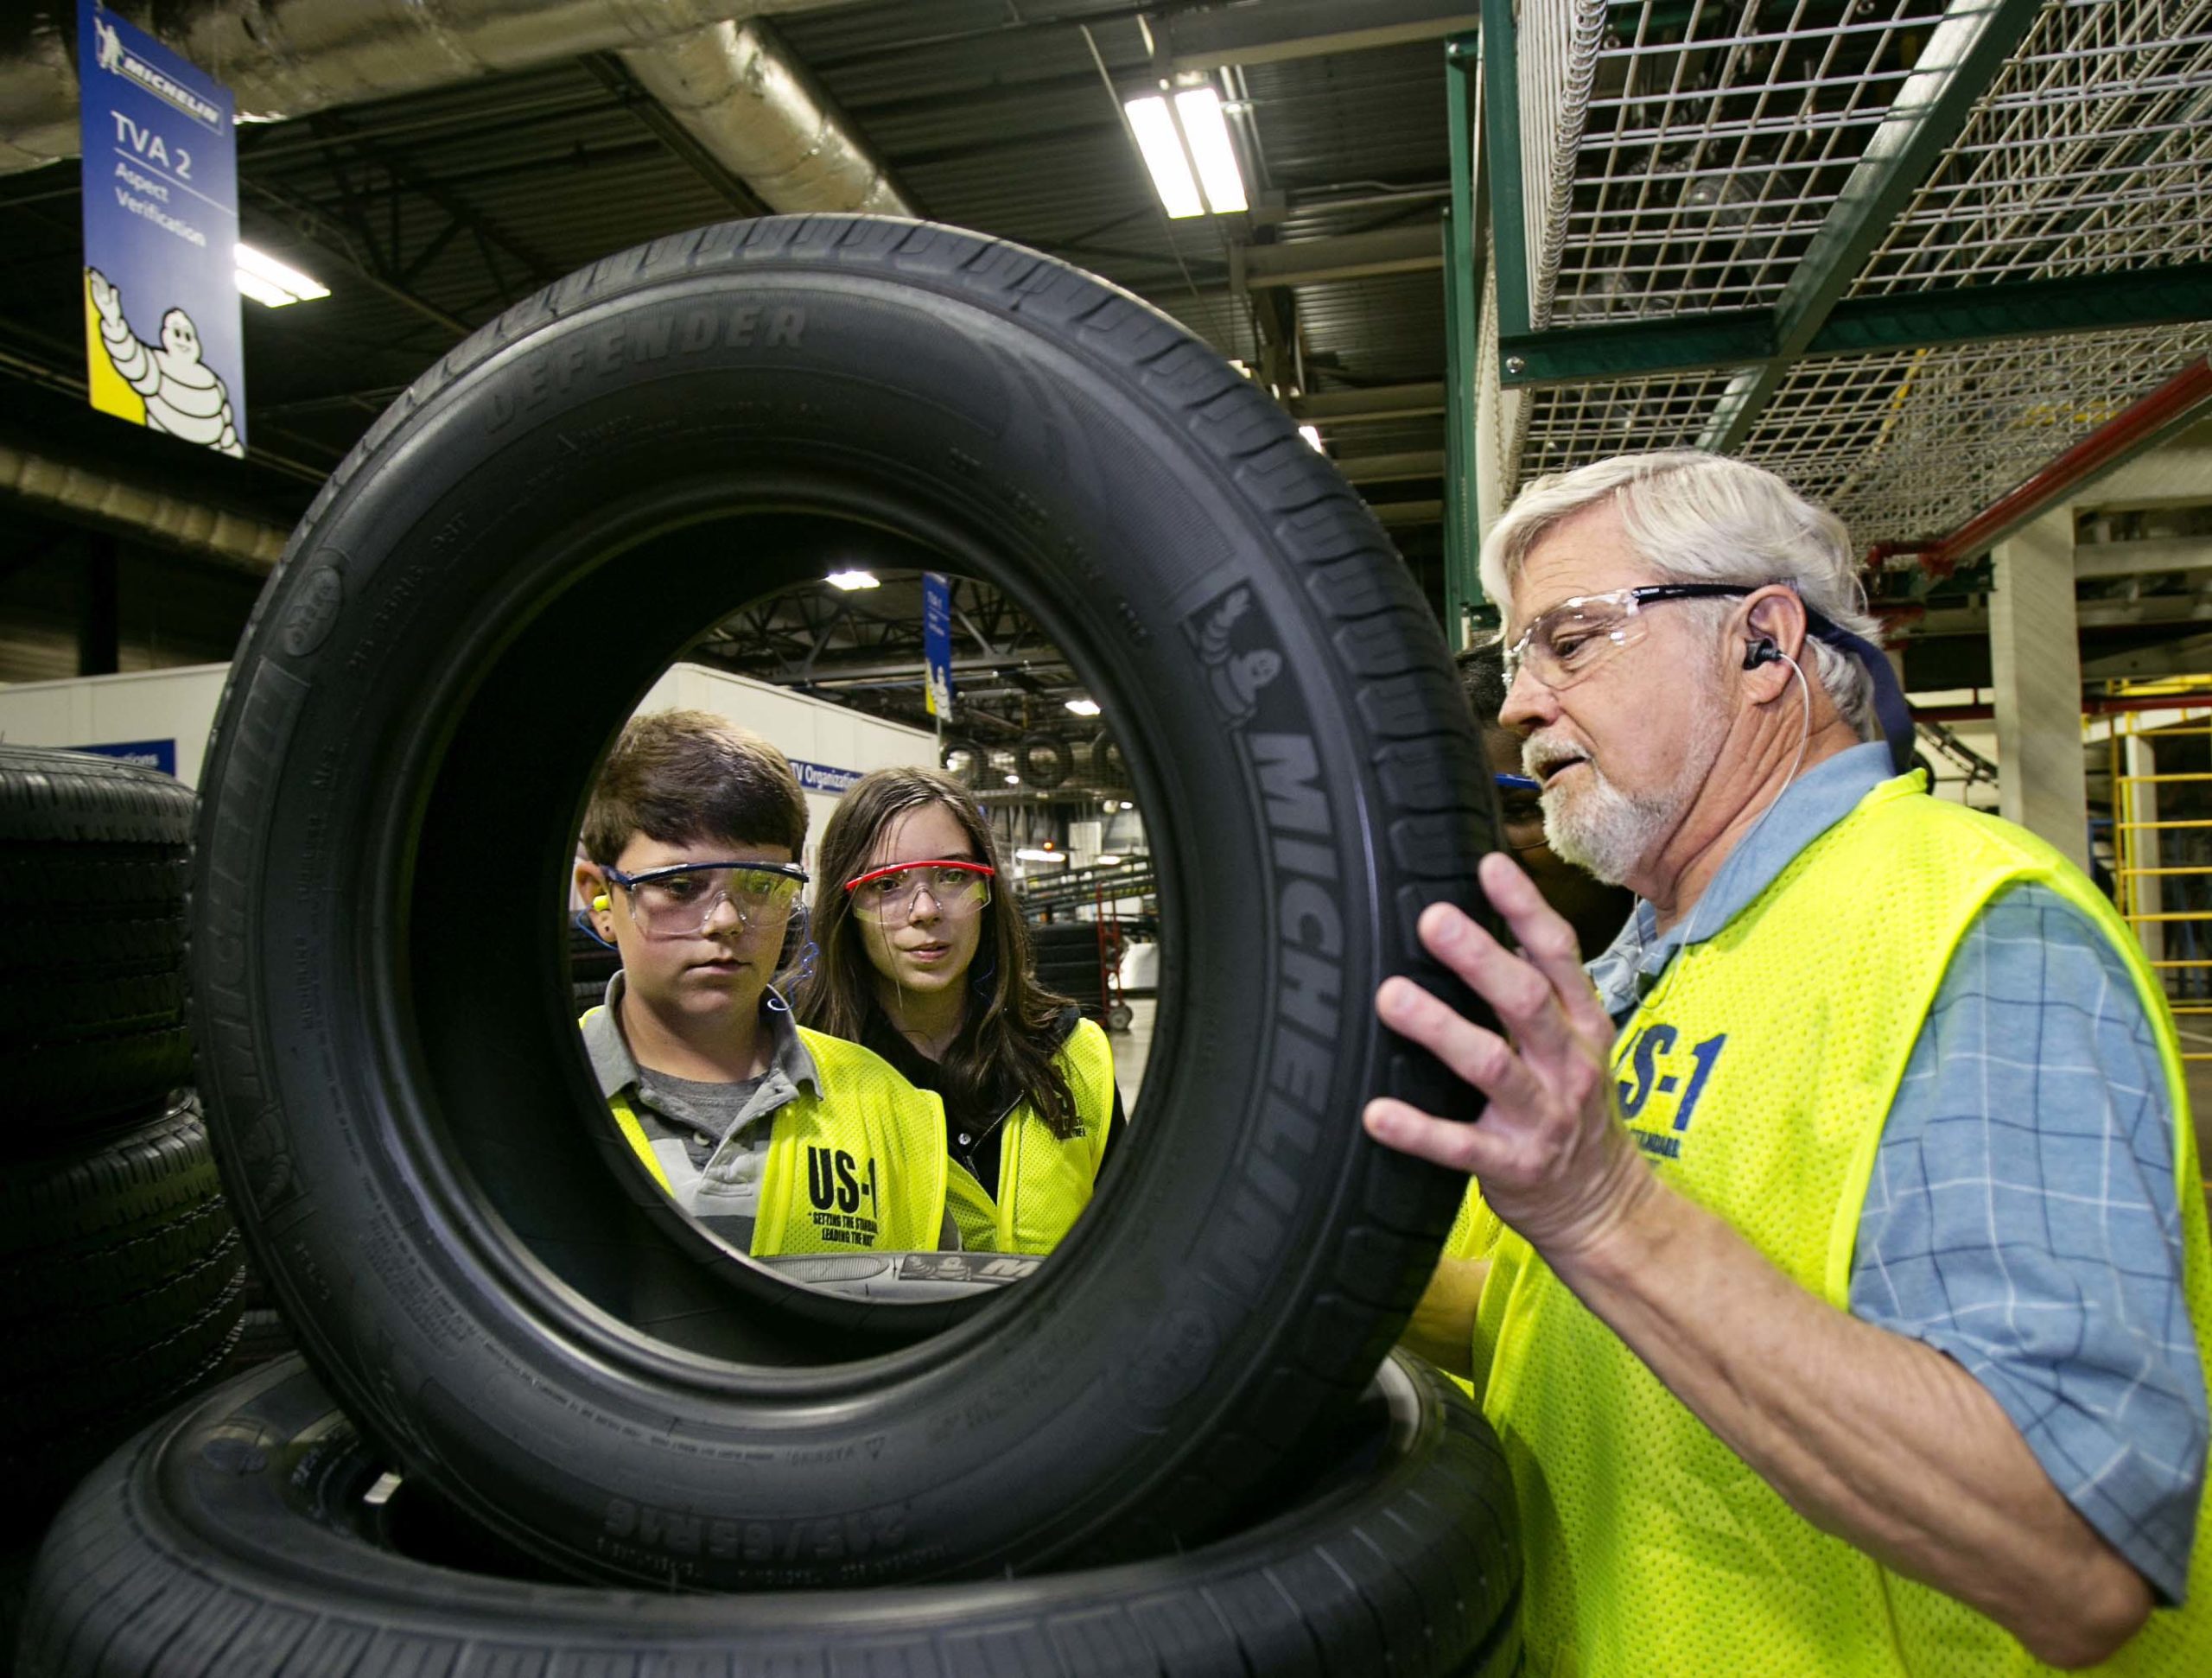 A Michelin employee showing two children a tire in a factory